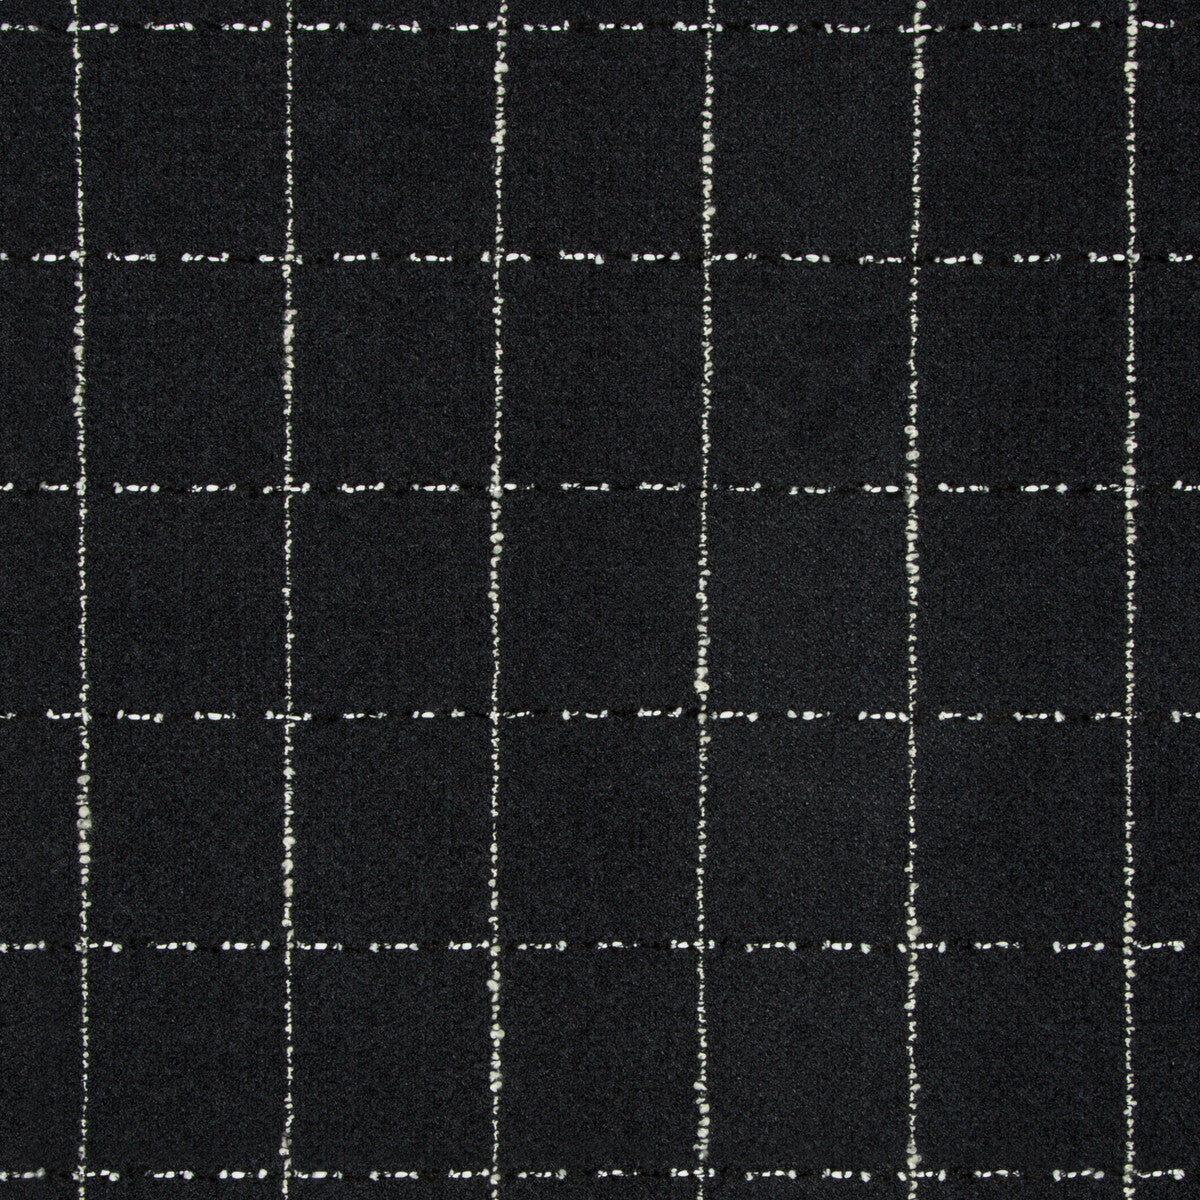 Pocket Square fabric in noir color - pattern 34906.8.0 - by Kravet Couture in the Modern Tailor collection